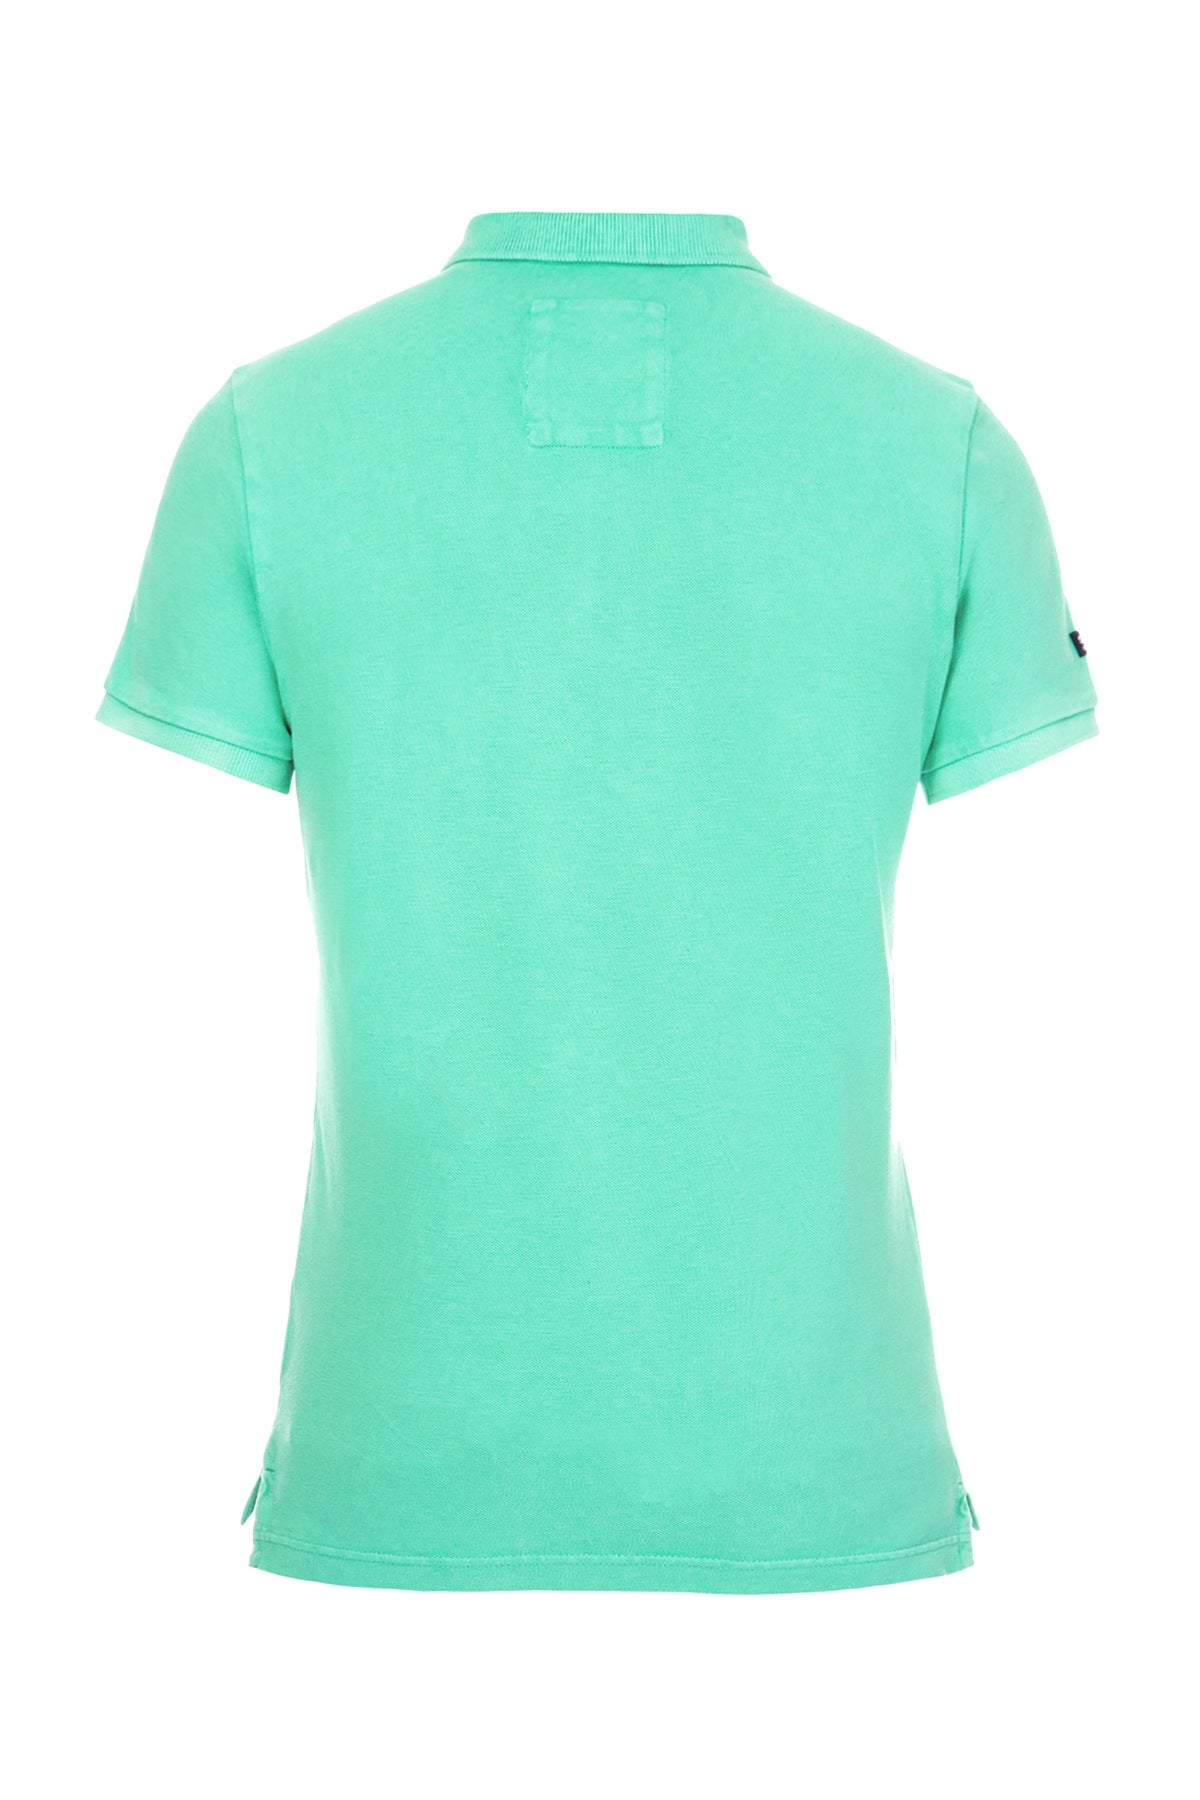 SuperDry Mint-Green Vintage Destroyed Pique Polo Shirt